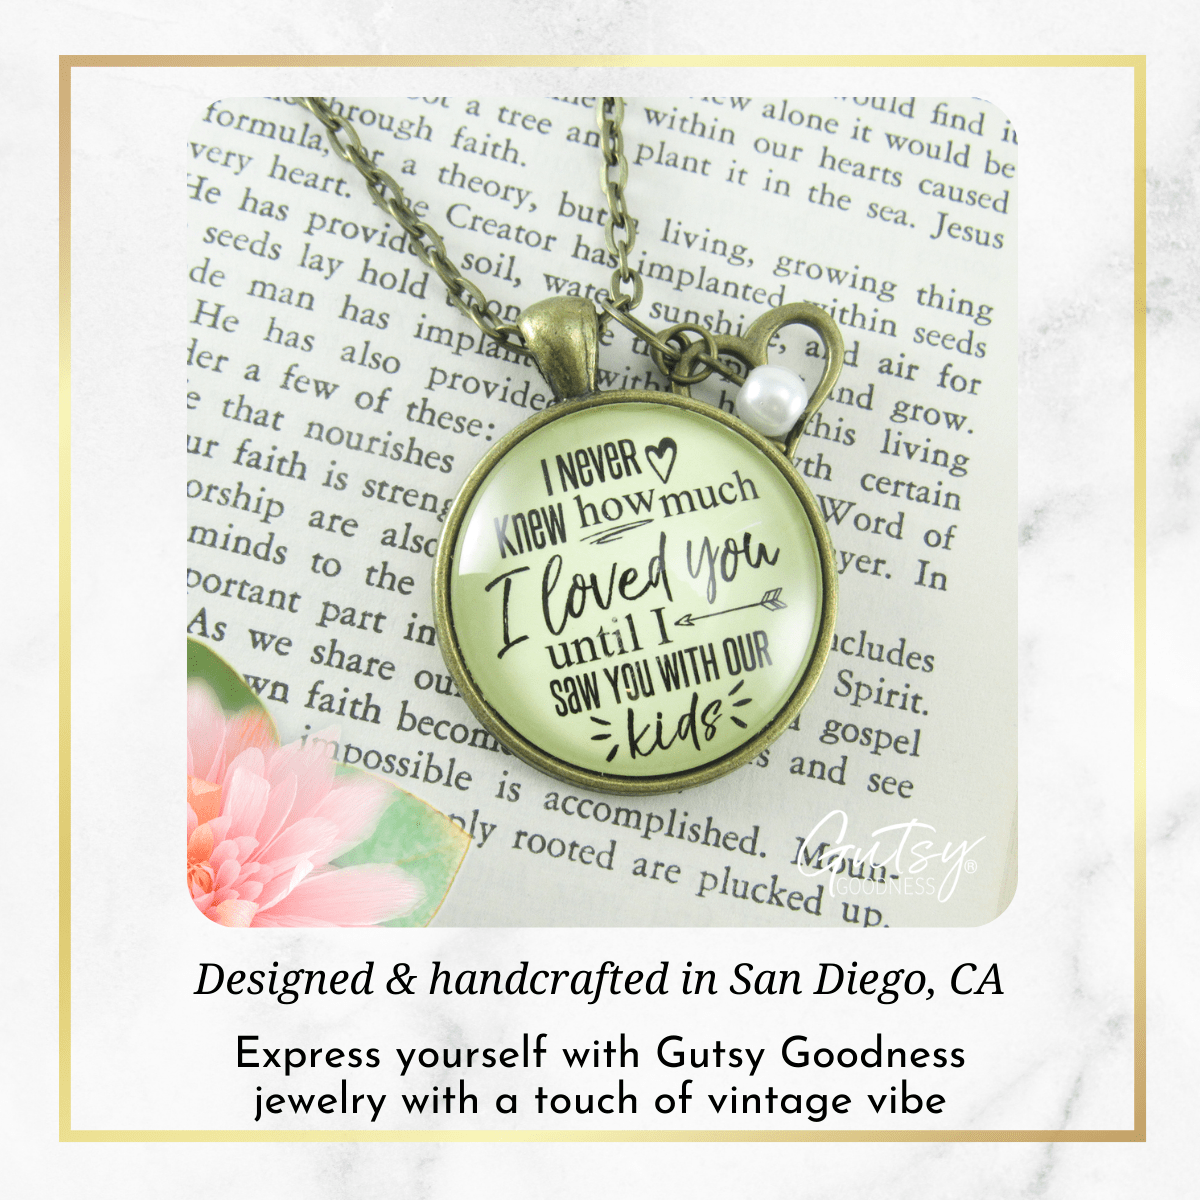 Gutsy Goodness Wife Necklace New Mom I Never Knew How Love Until Kids Gift Jewelry - Gutsy Goodness;Wife Necklace New Mom I Never Knew How Love Until Kids Gift Jewelry - Gutsy Goodness Handmade Jewelry Gifts